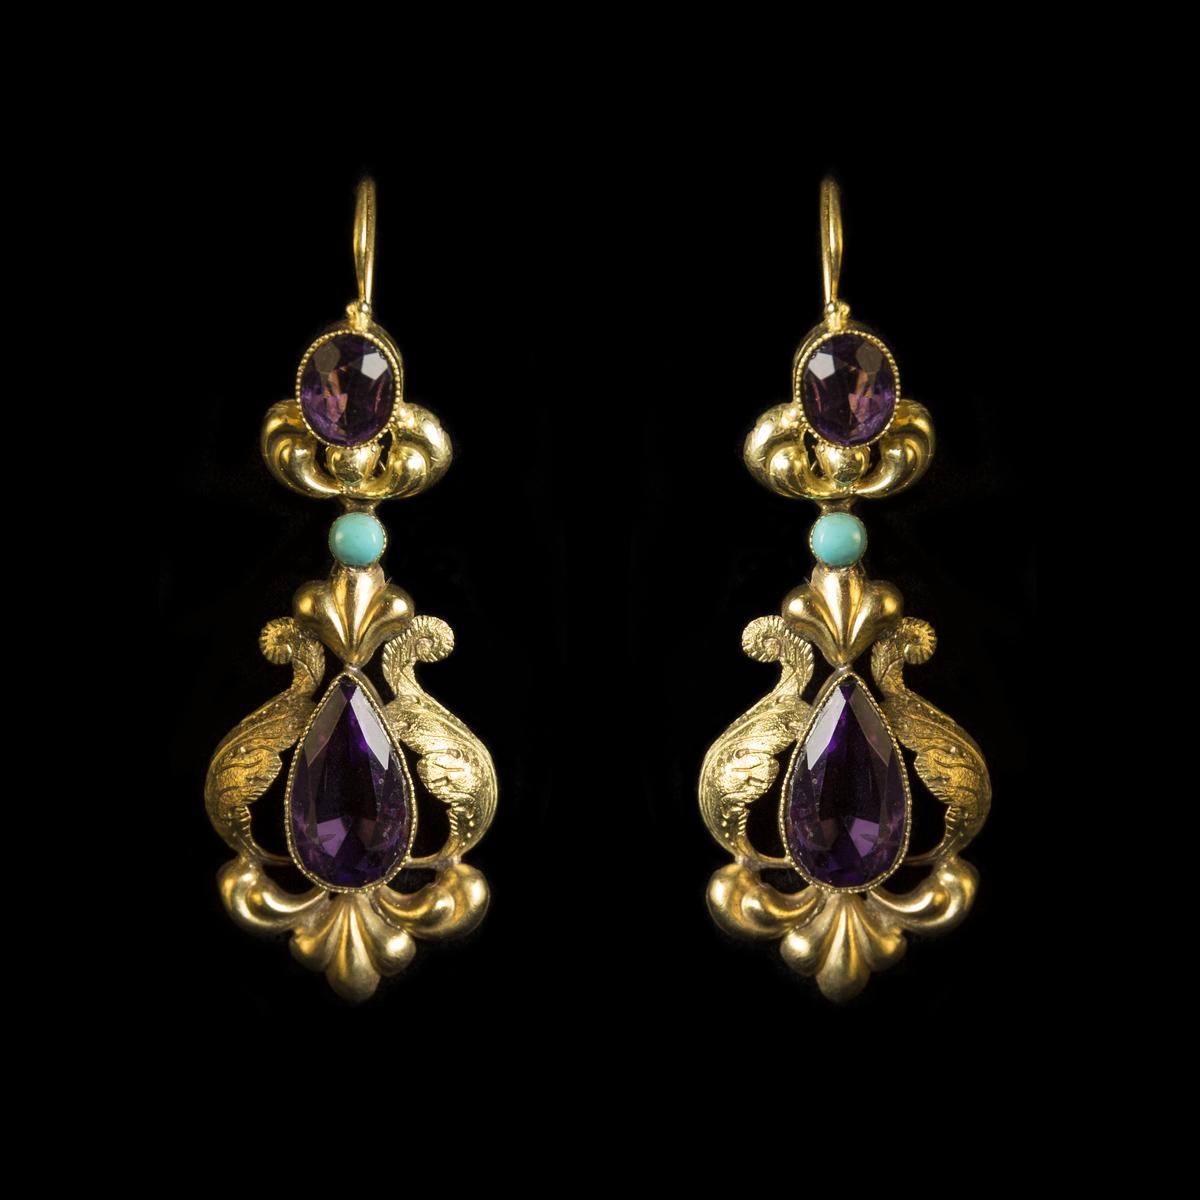 18 Kt Gold Antique Earrings with Amethysts and Turquoise, Sicily, Early 1900s In Excellent Condition For Sale In roma, IT